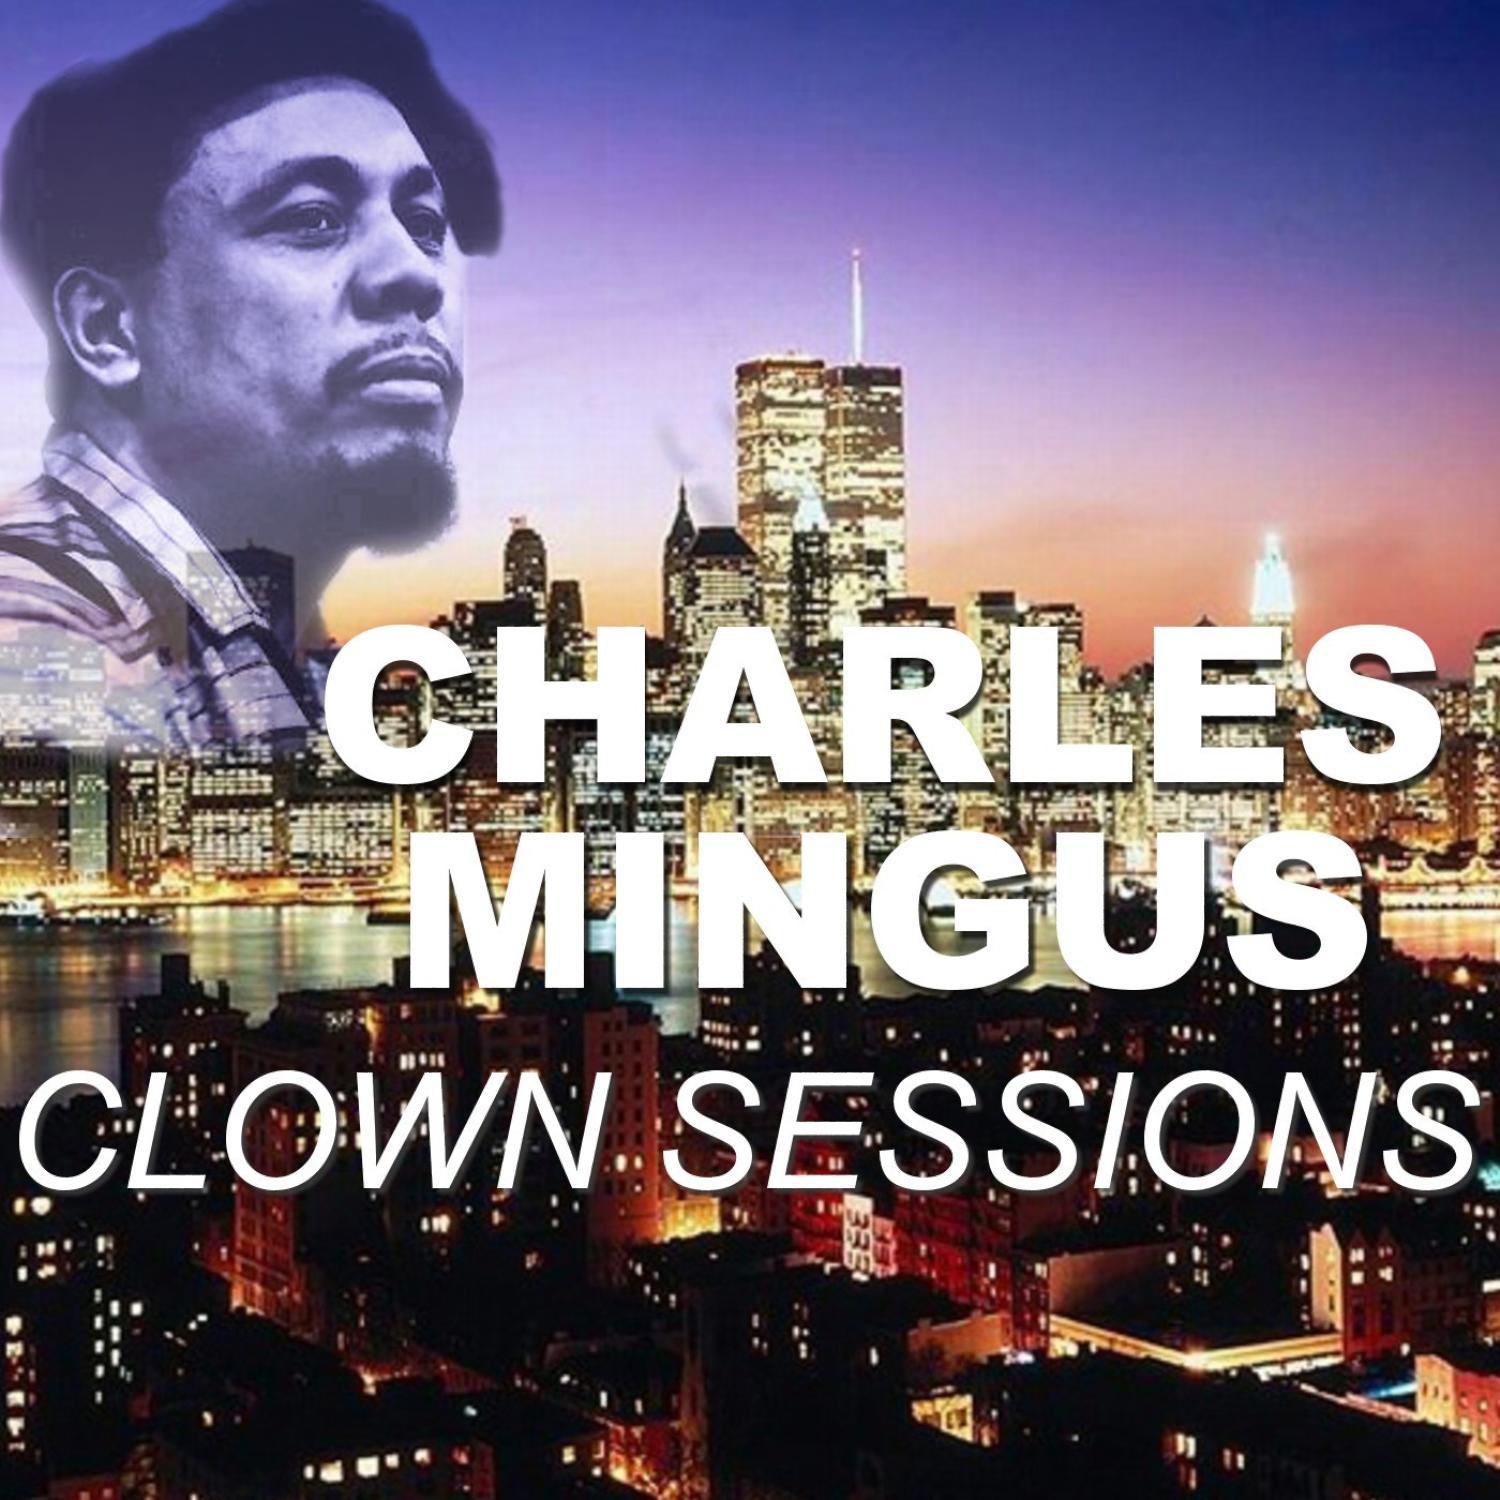 Clown Sessions